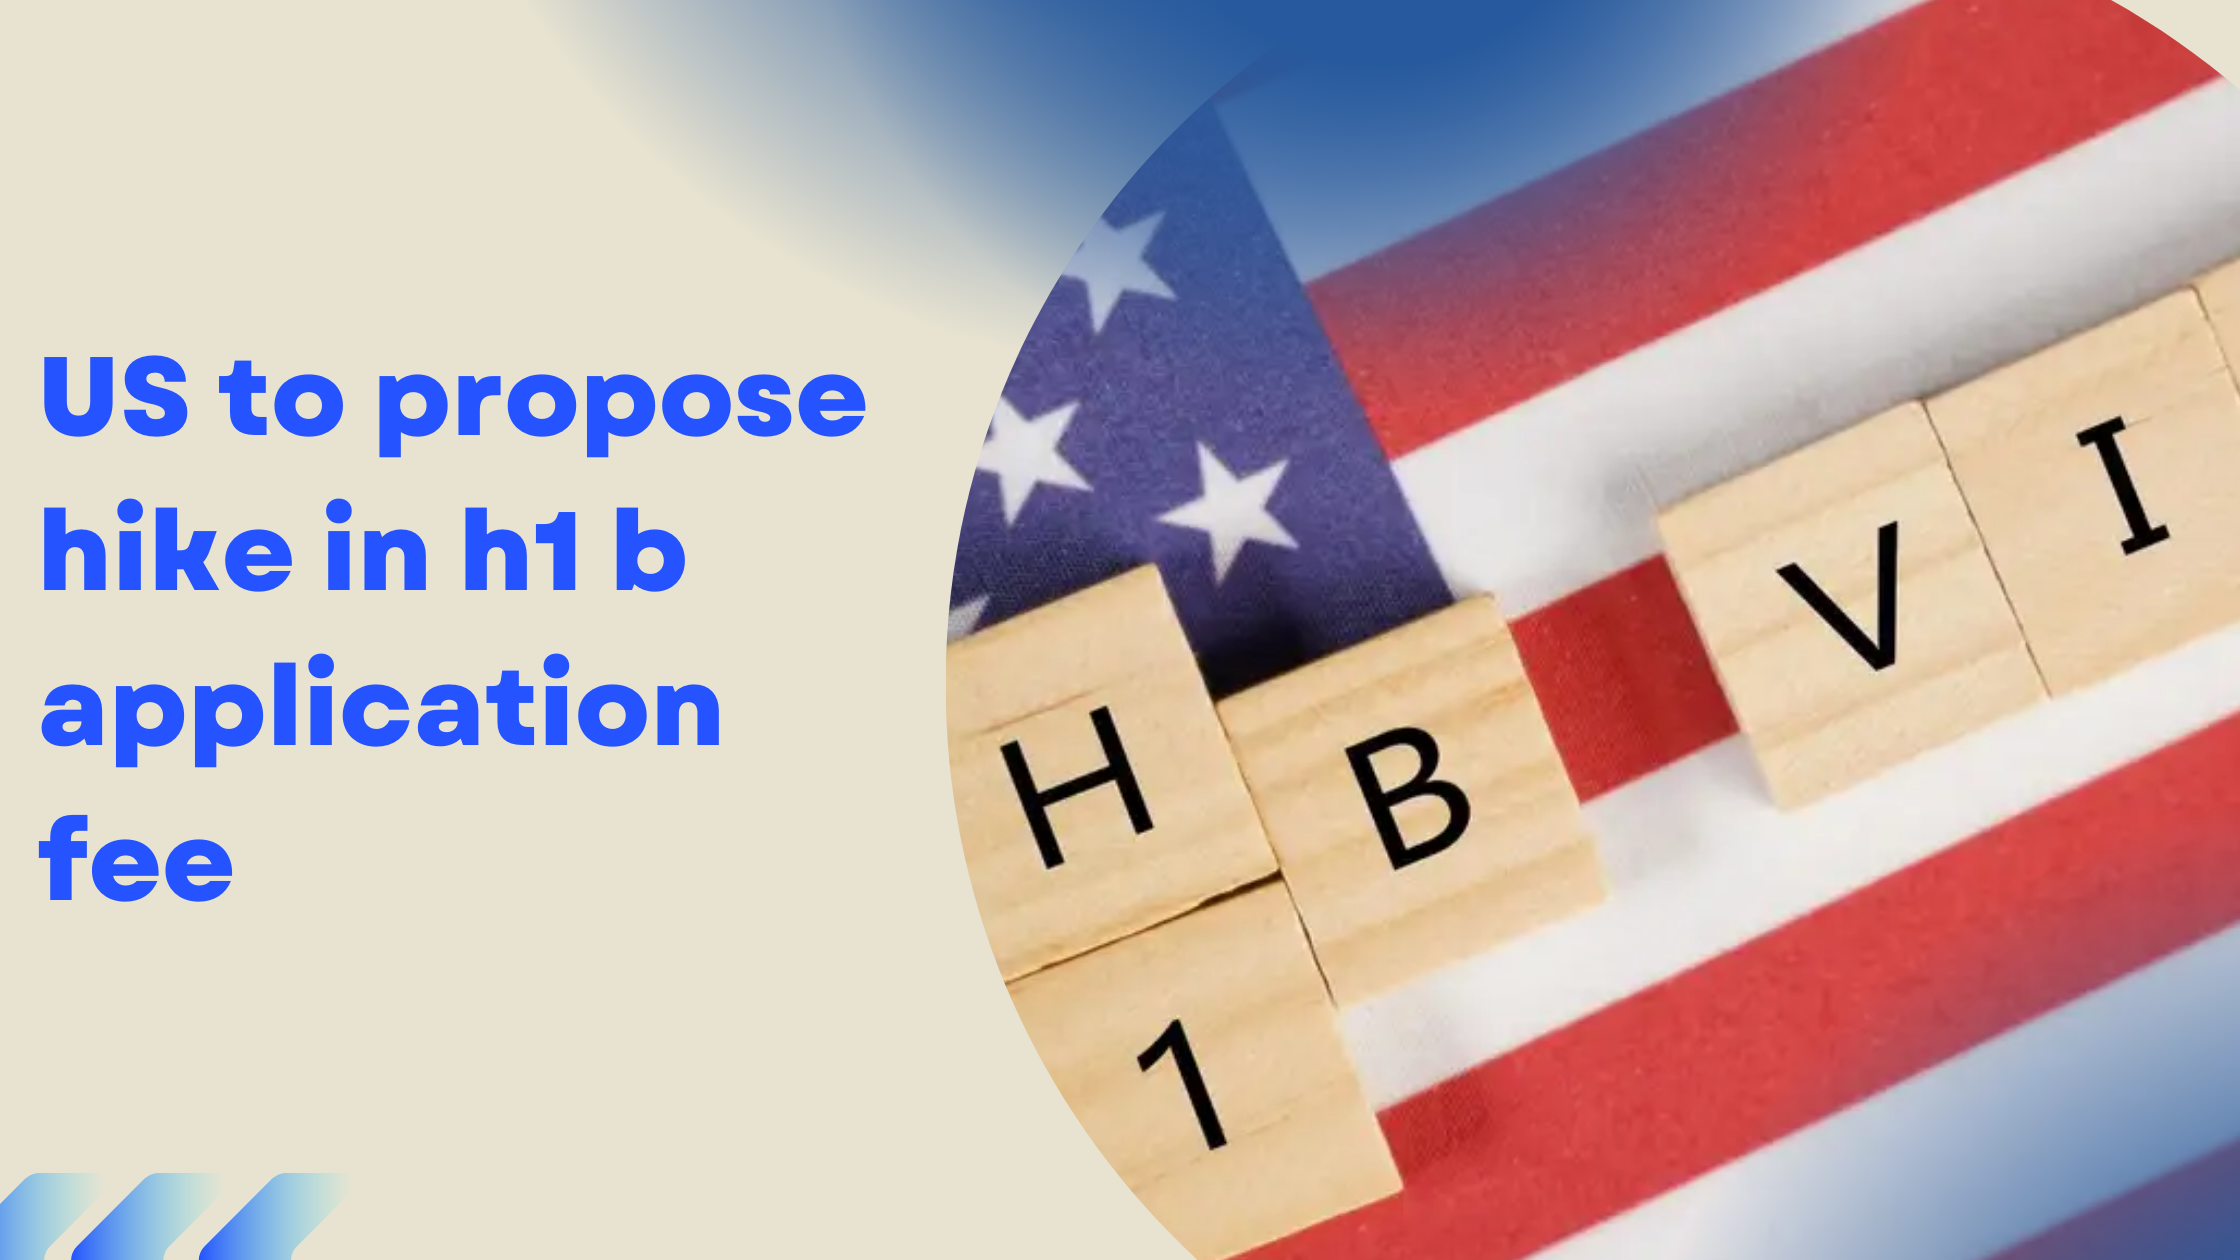 US to propose hike in h1 b application fee